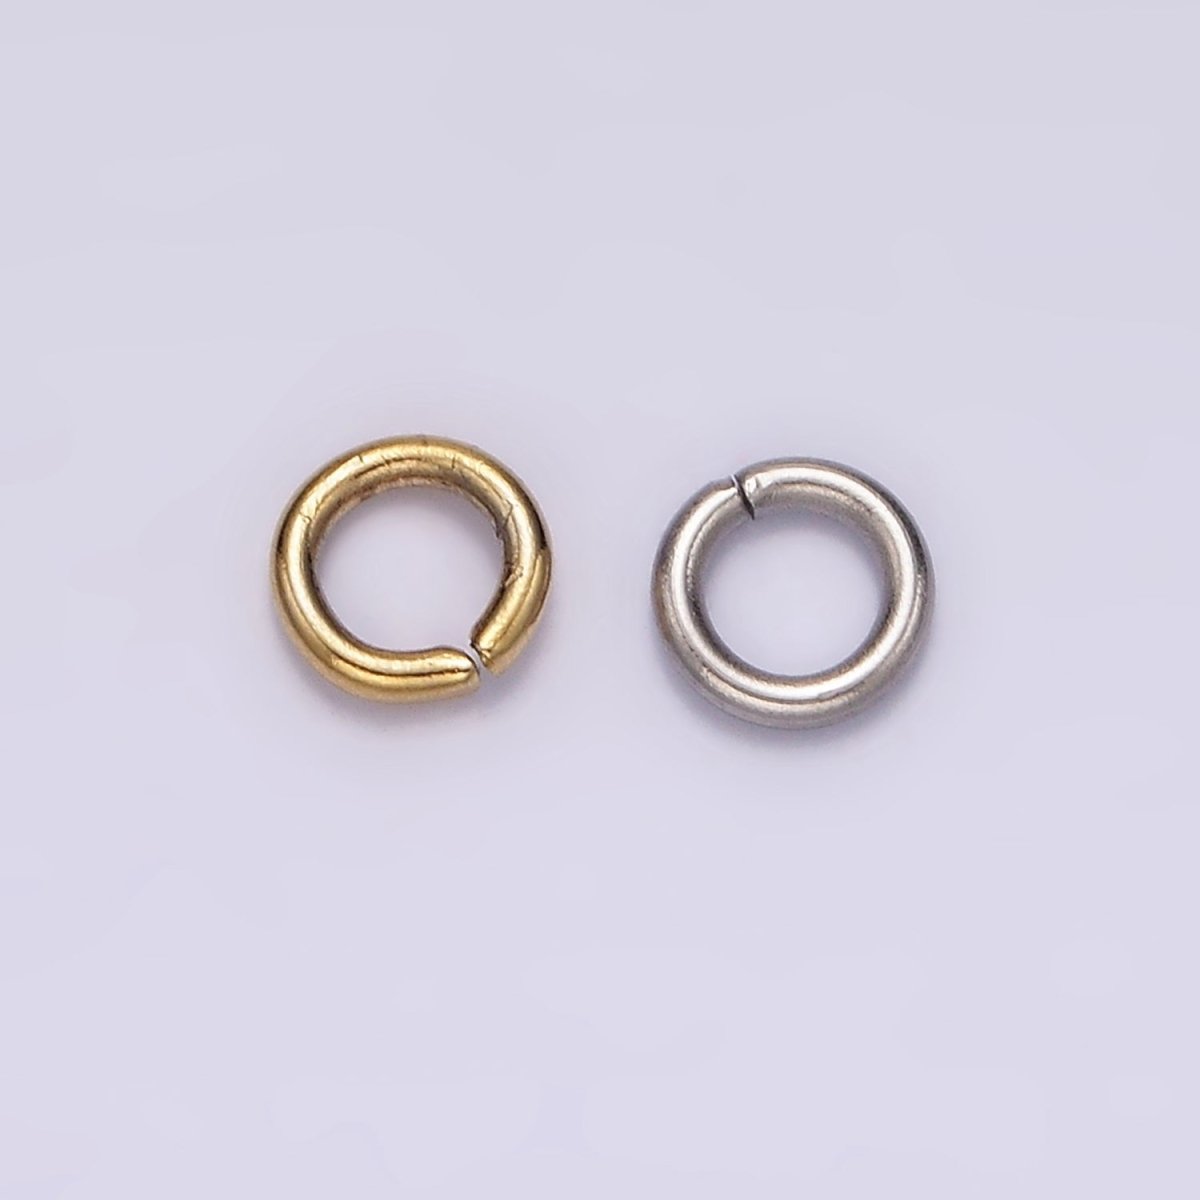 Stainless Steel 5mm x 1mm Jump Ring Pack Jewelry Making Findings Supply in Gold & Silver | Z587 Z588 - DLUXCA